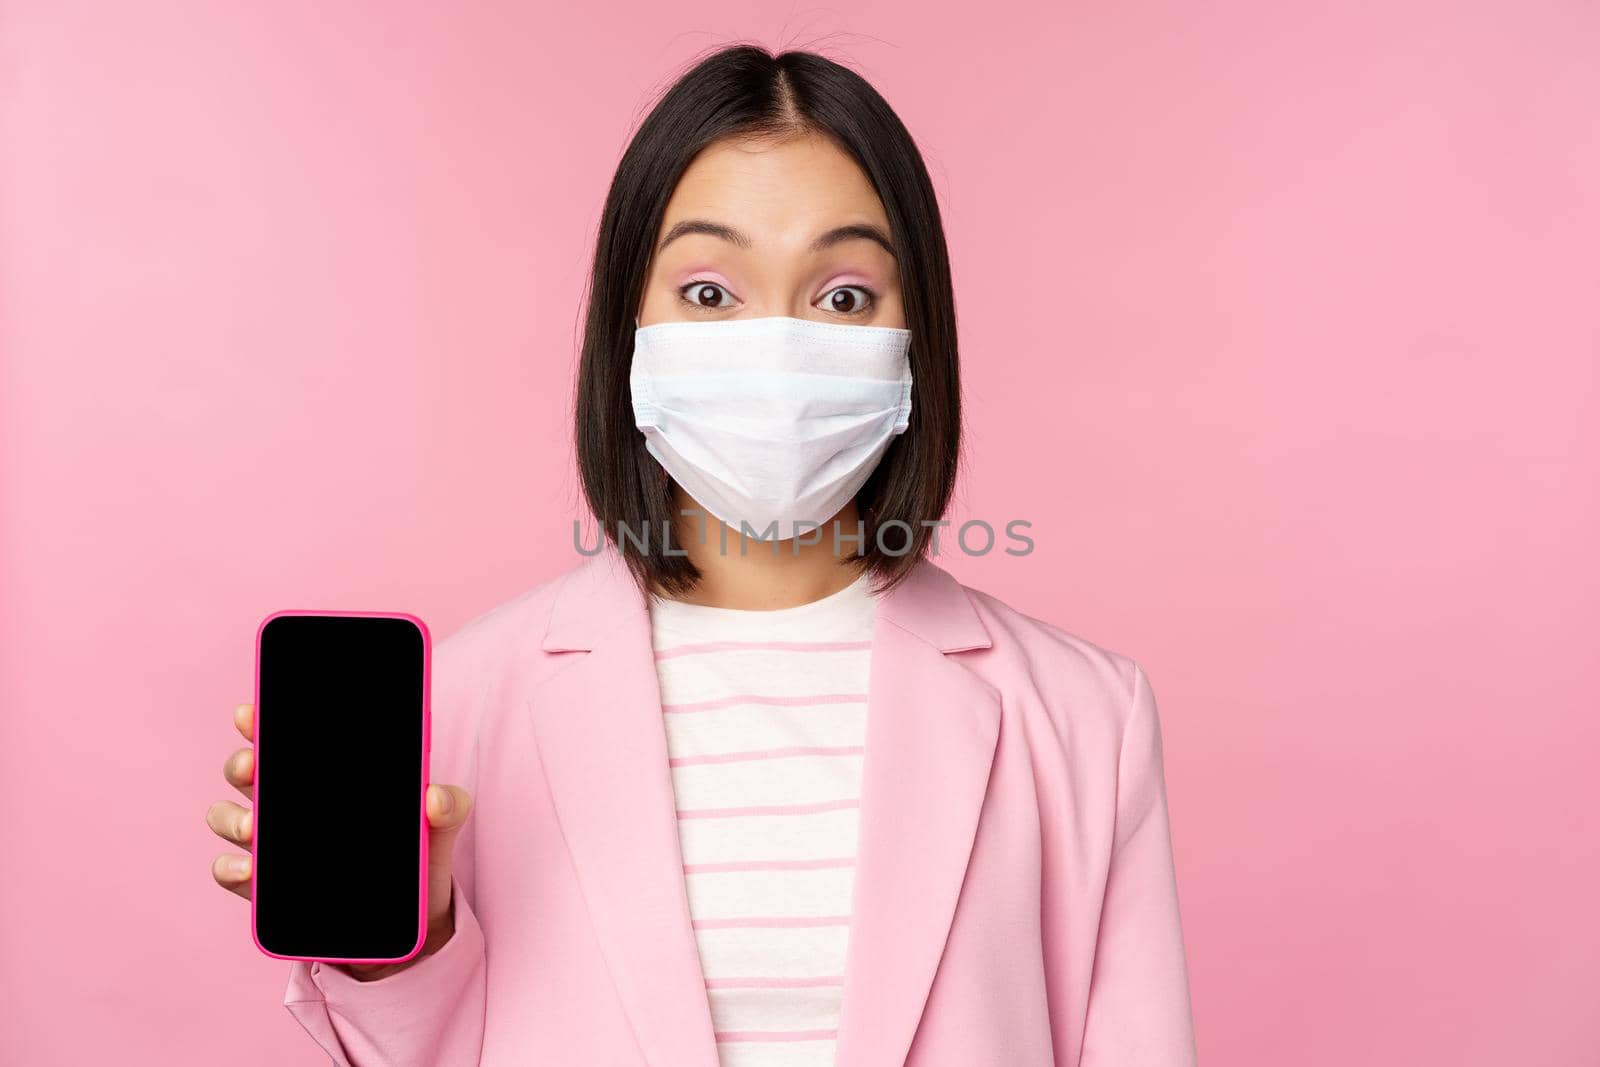 Portrait of smiling korean saleswoman in medical face mask, business suit, showing smartphone screen, standing over pink background.